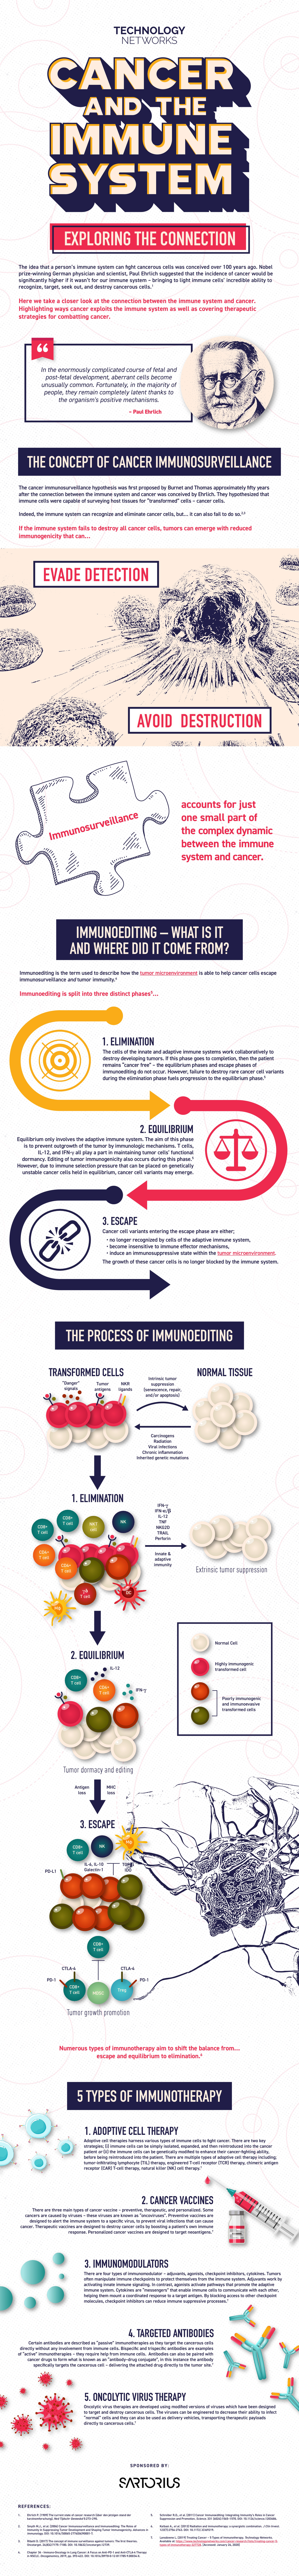 Cancer and the Immune System Infographic